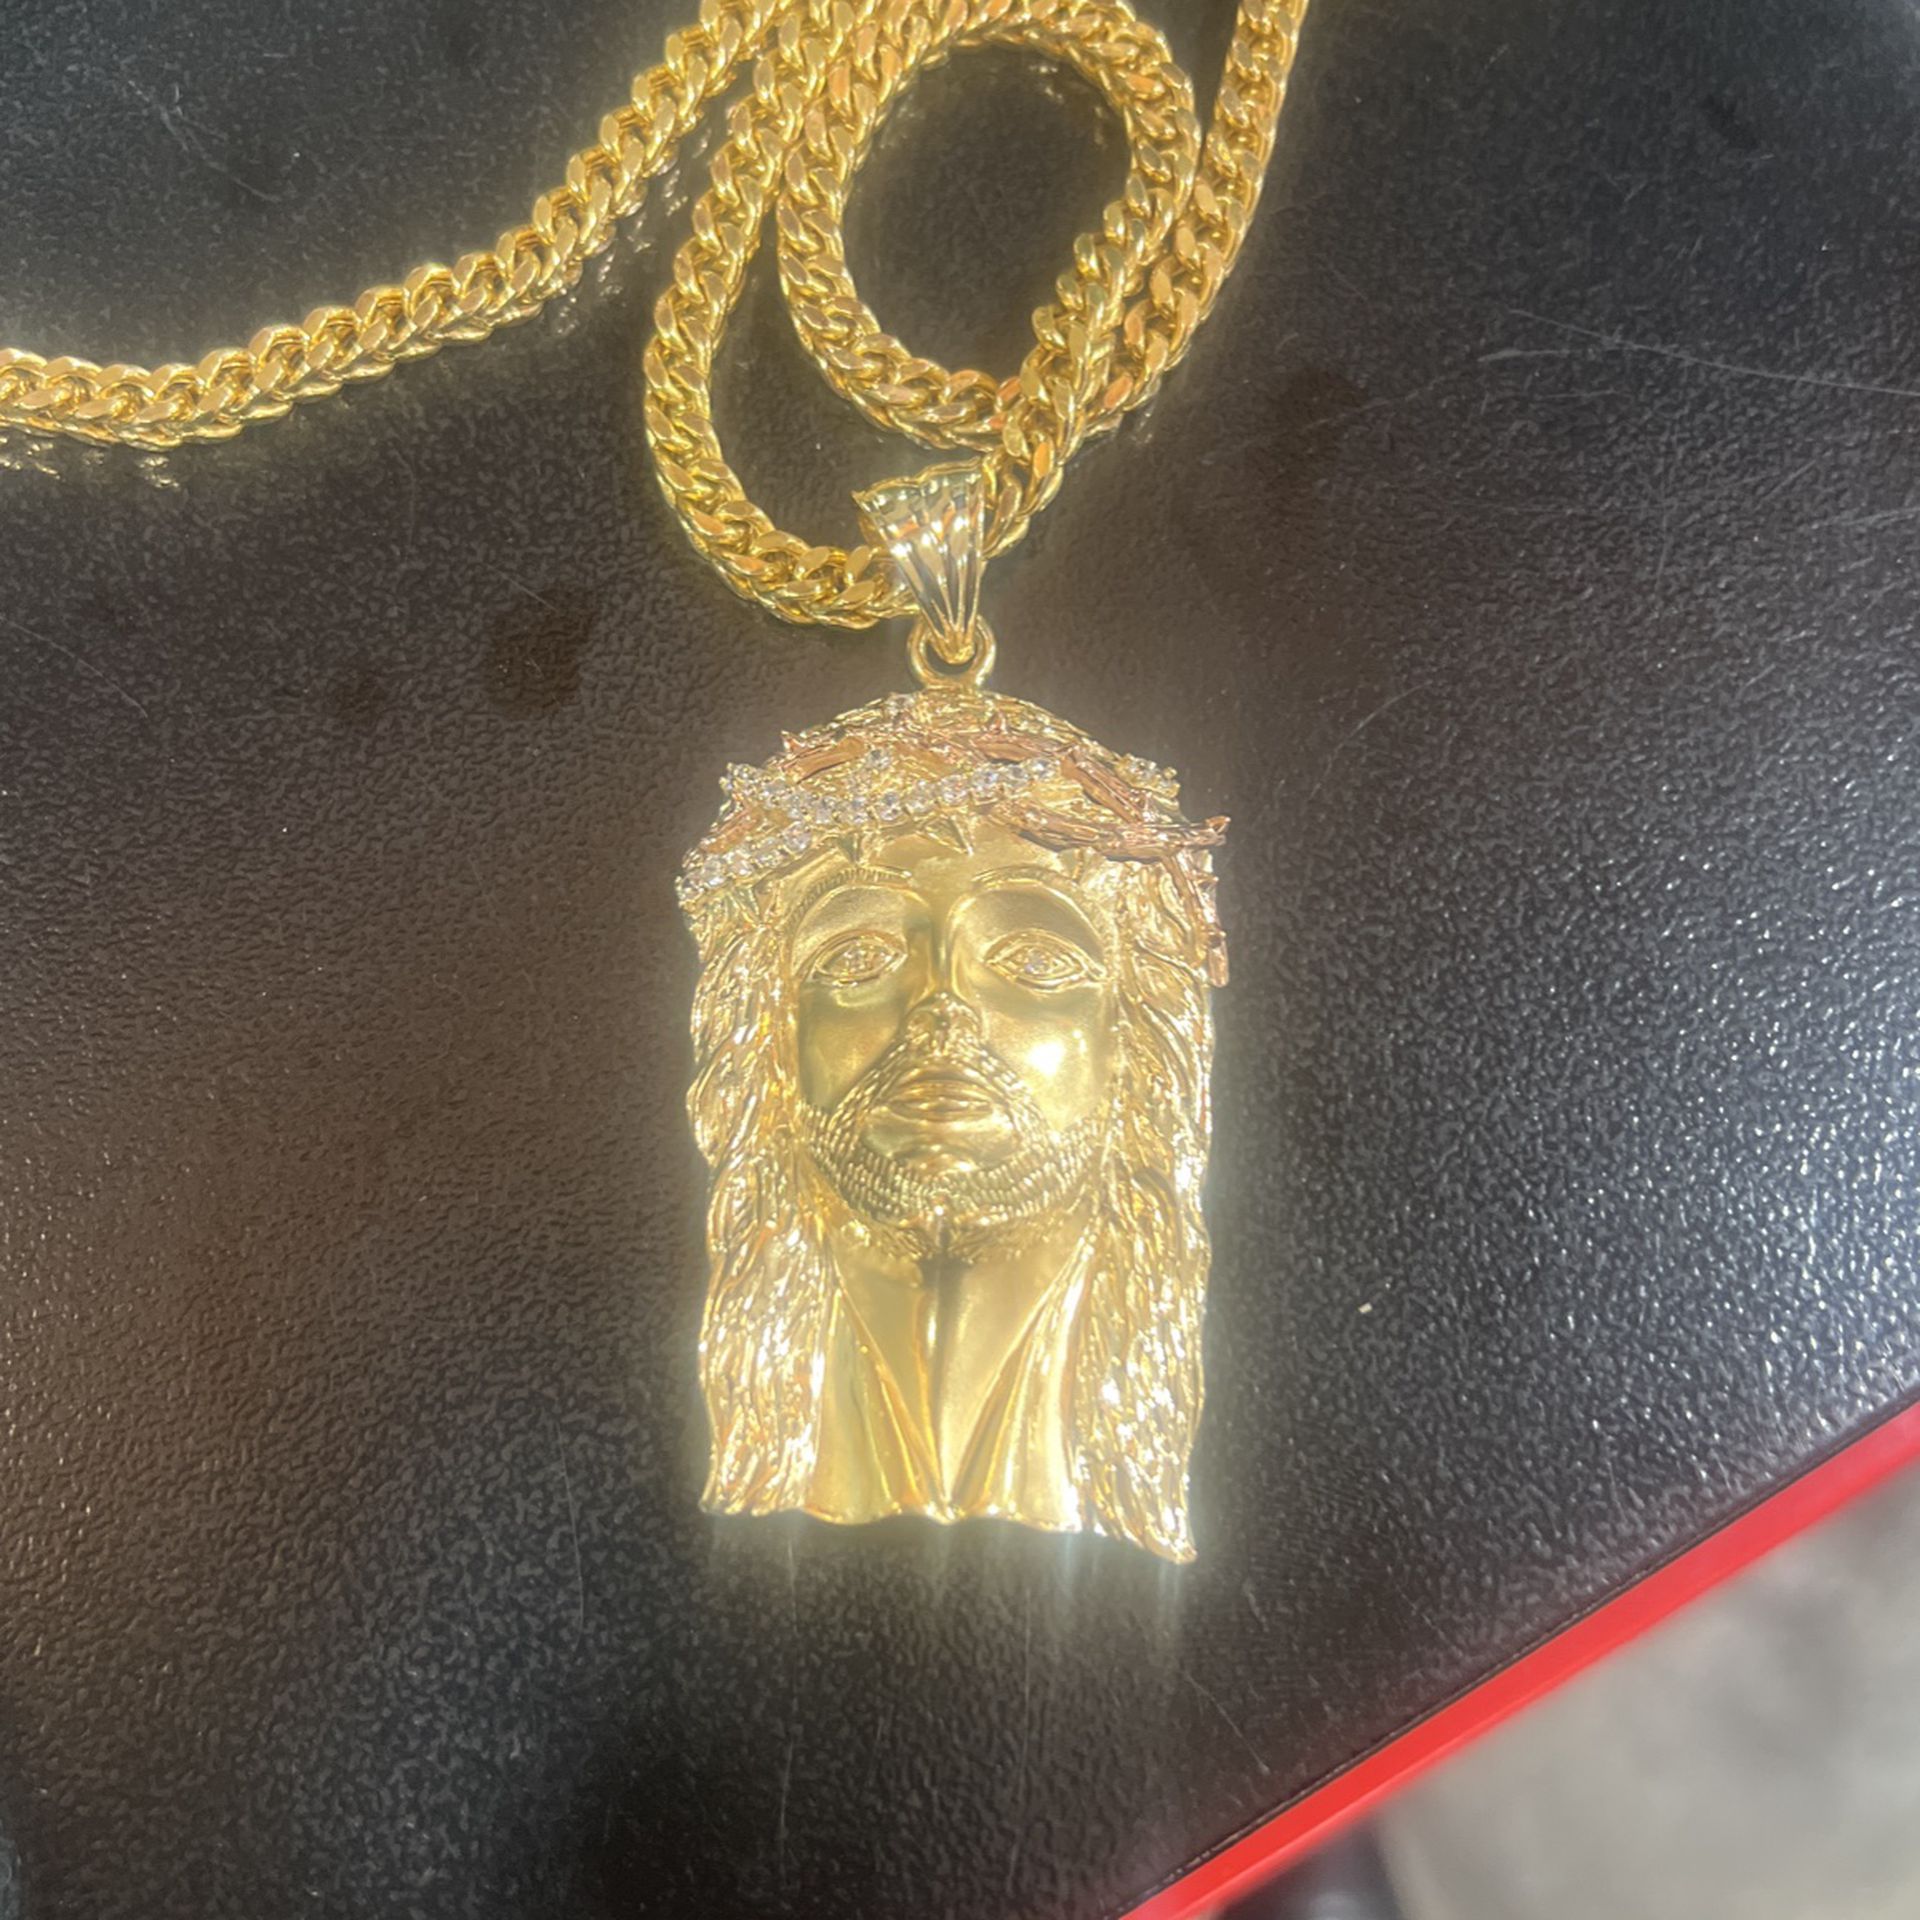 14 karat gold chain with Christ pendant where is approximately 77 g